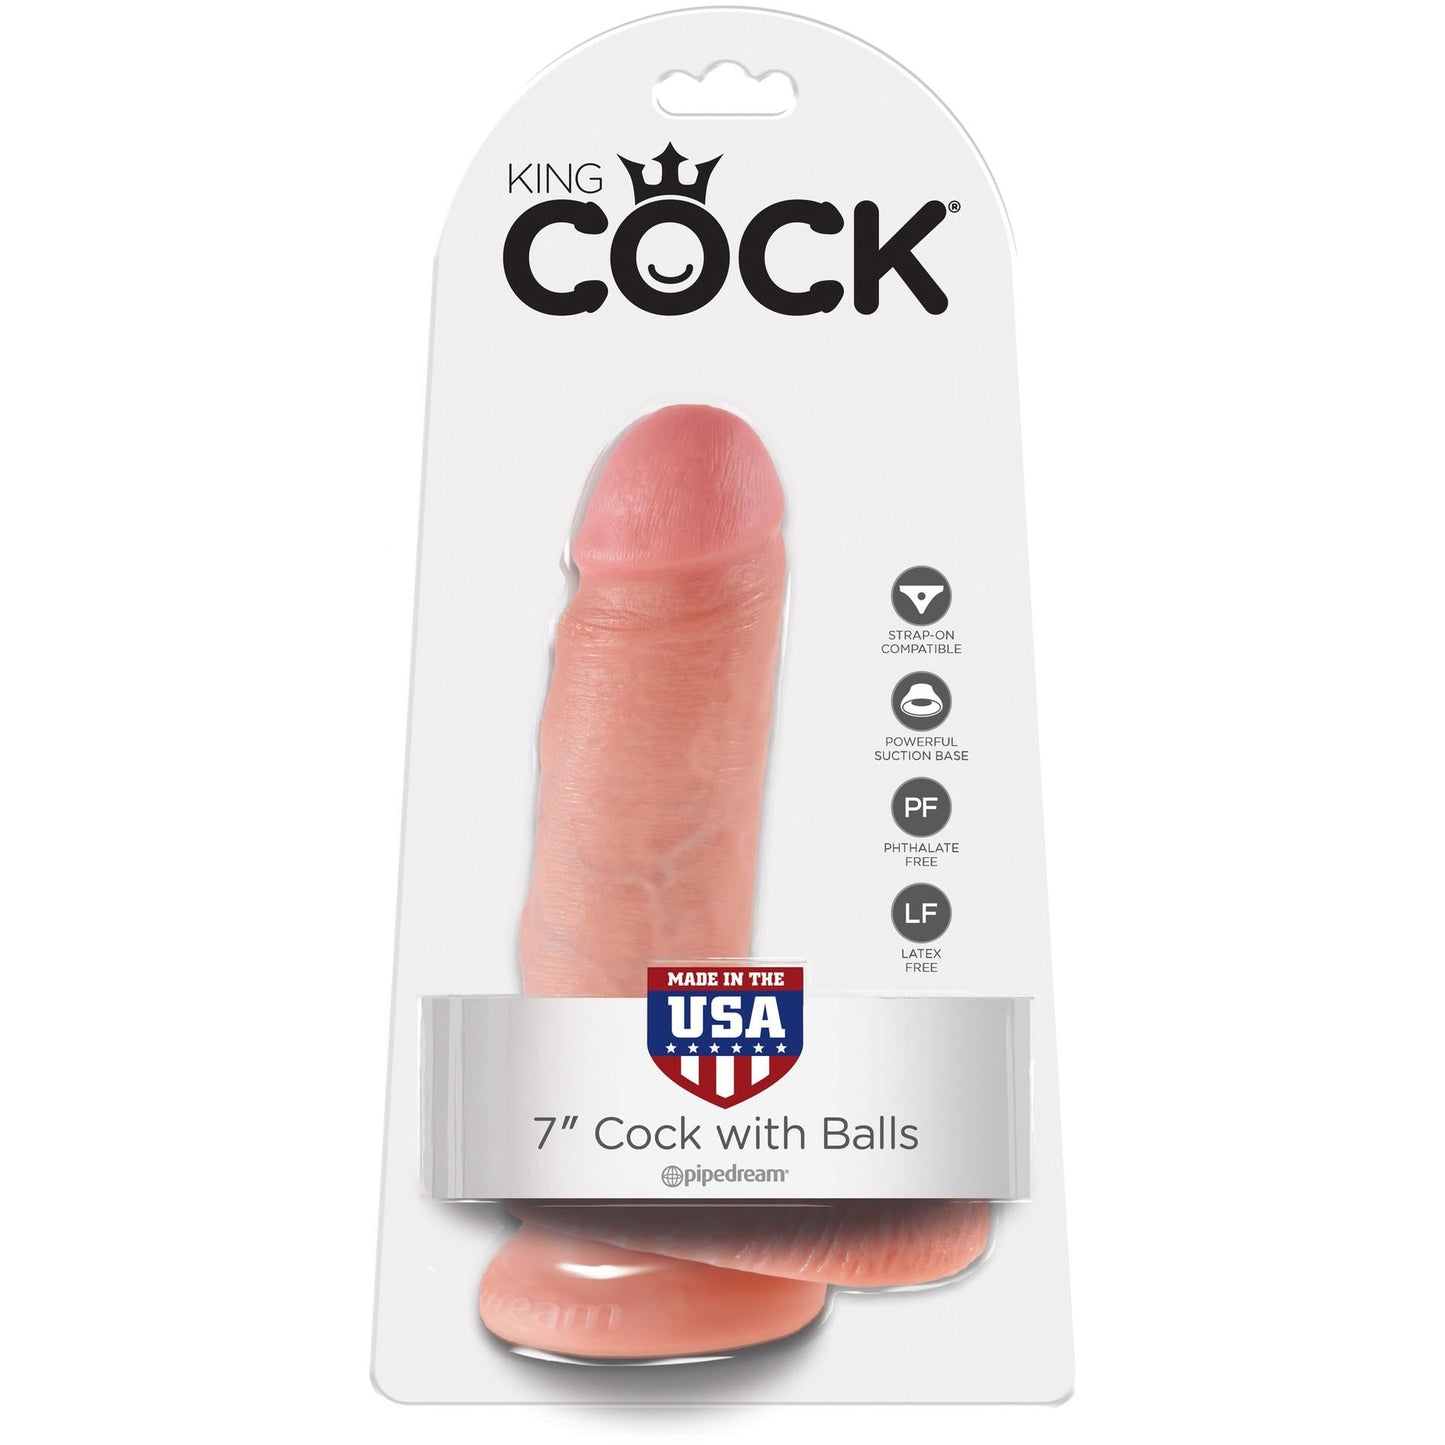 King Cock 7" Cock With Balls